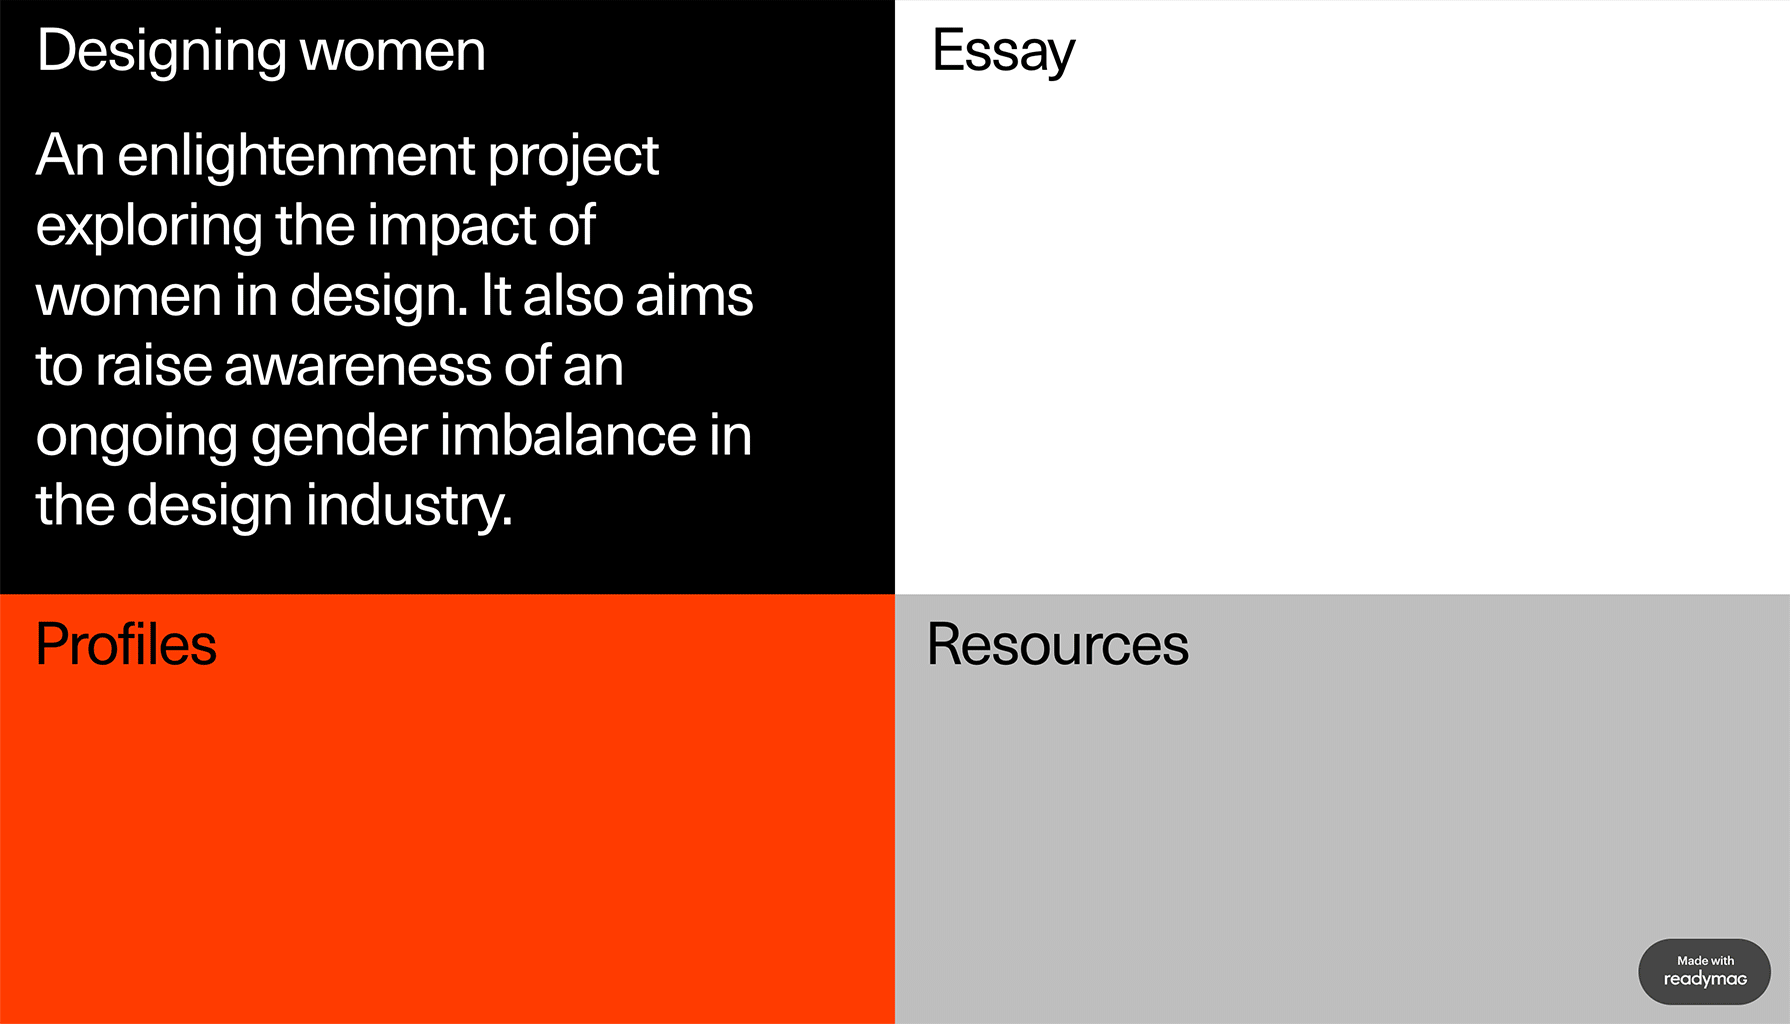 Designing Women: A research challenging gender imbalance